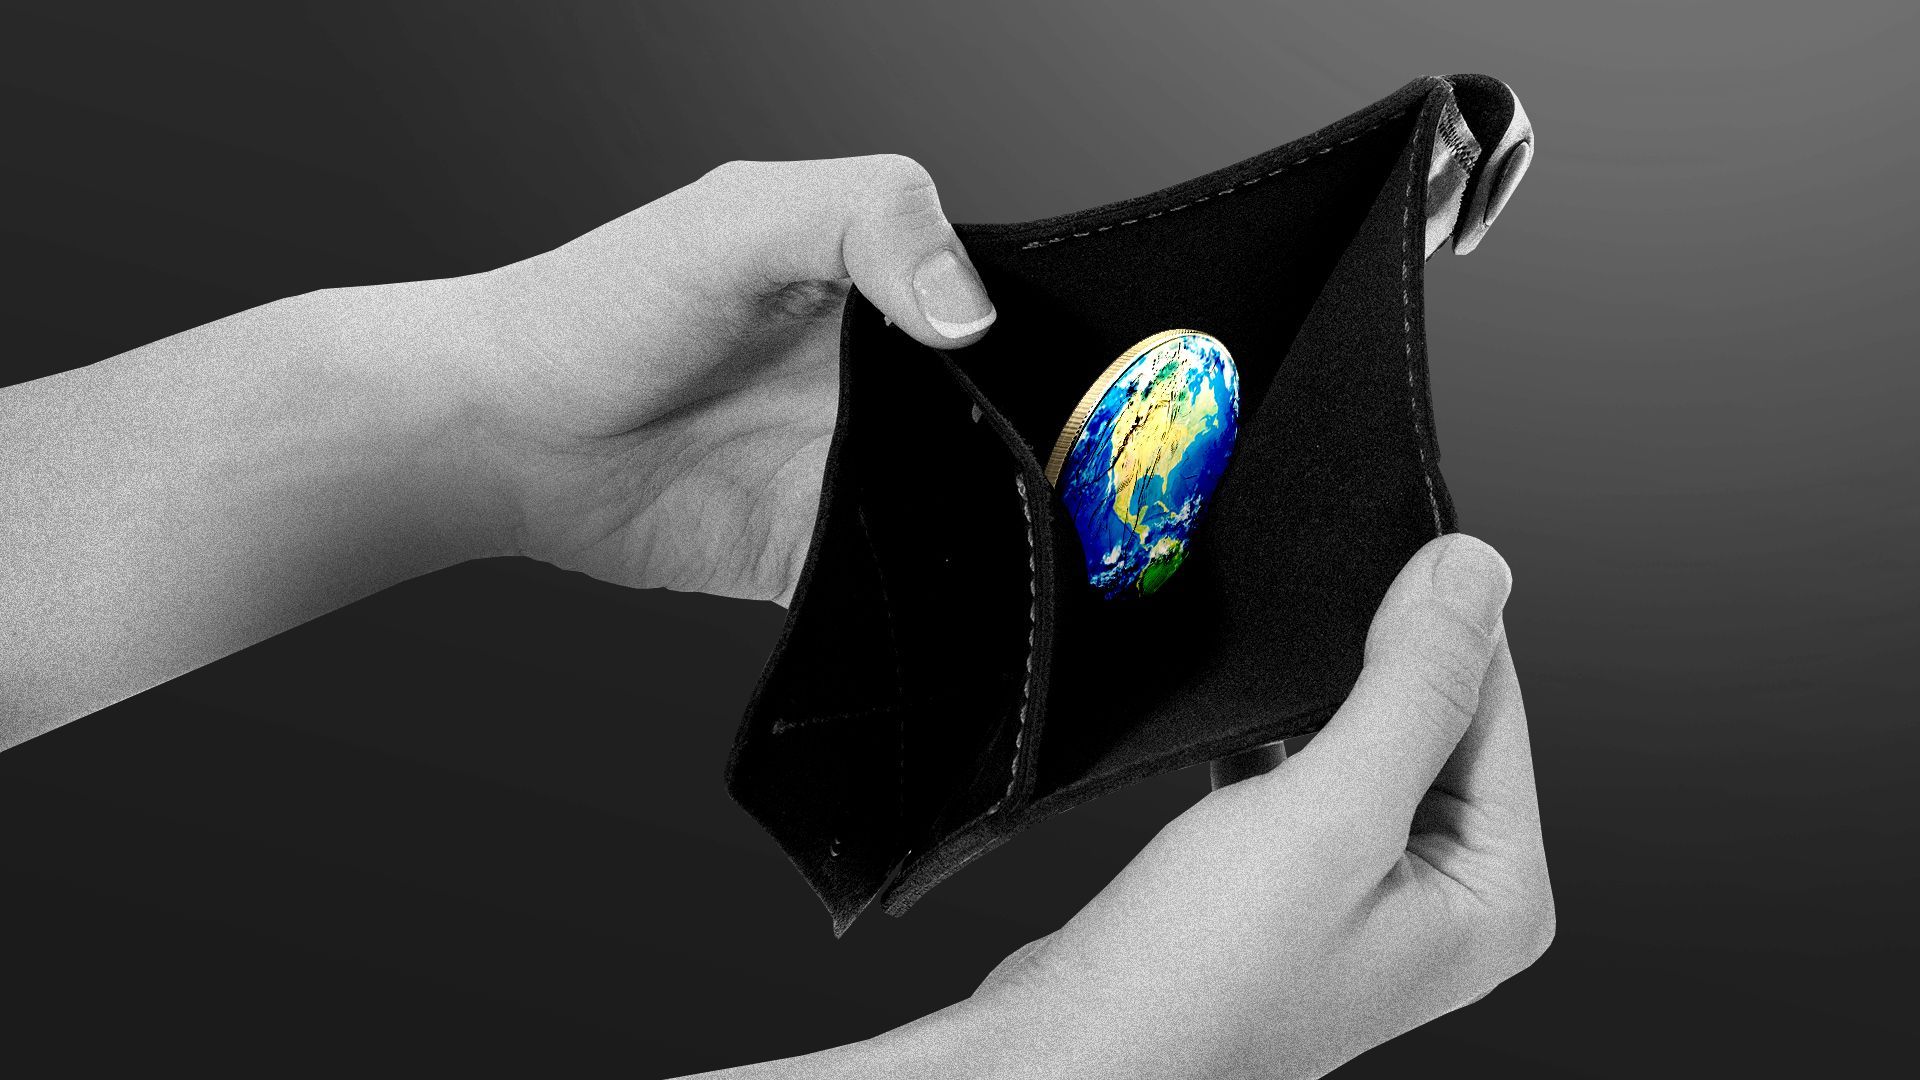 Illustration of hands opening a wallet to reveal Earth in the shape of a coin